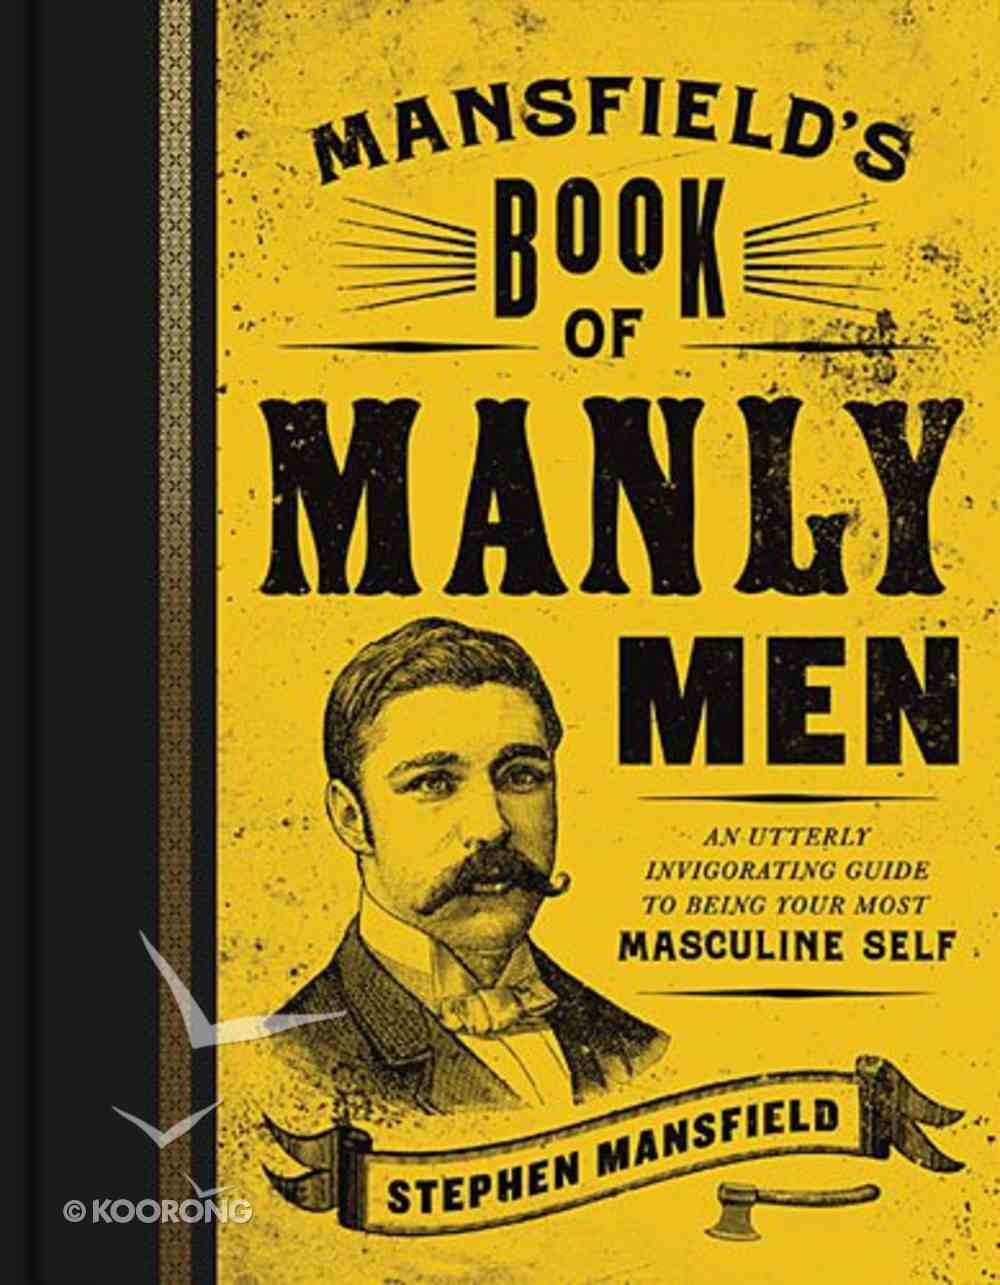 Mansfield's Book of Manly Men: An Utterly Invigorating Guide to Being Your Most Masculine Self Hardback